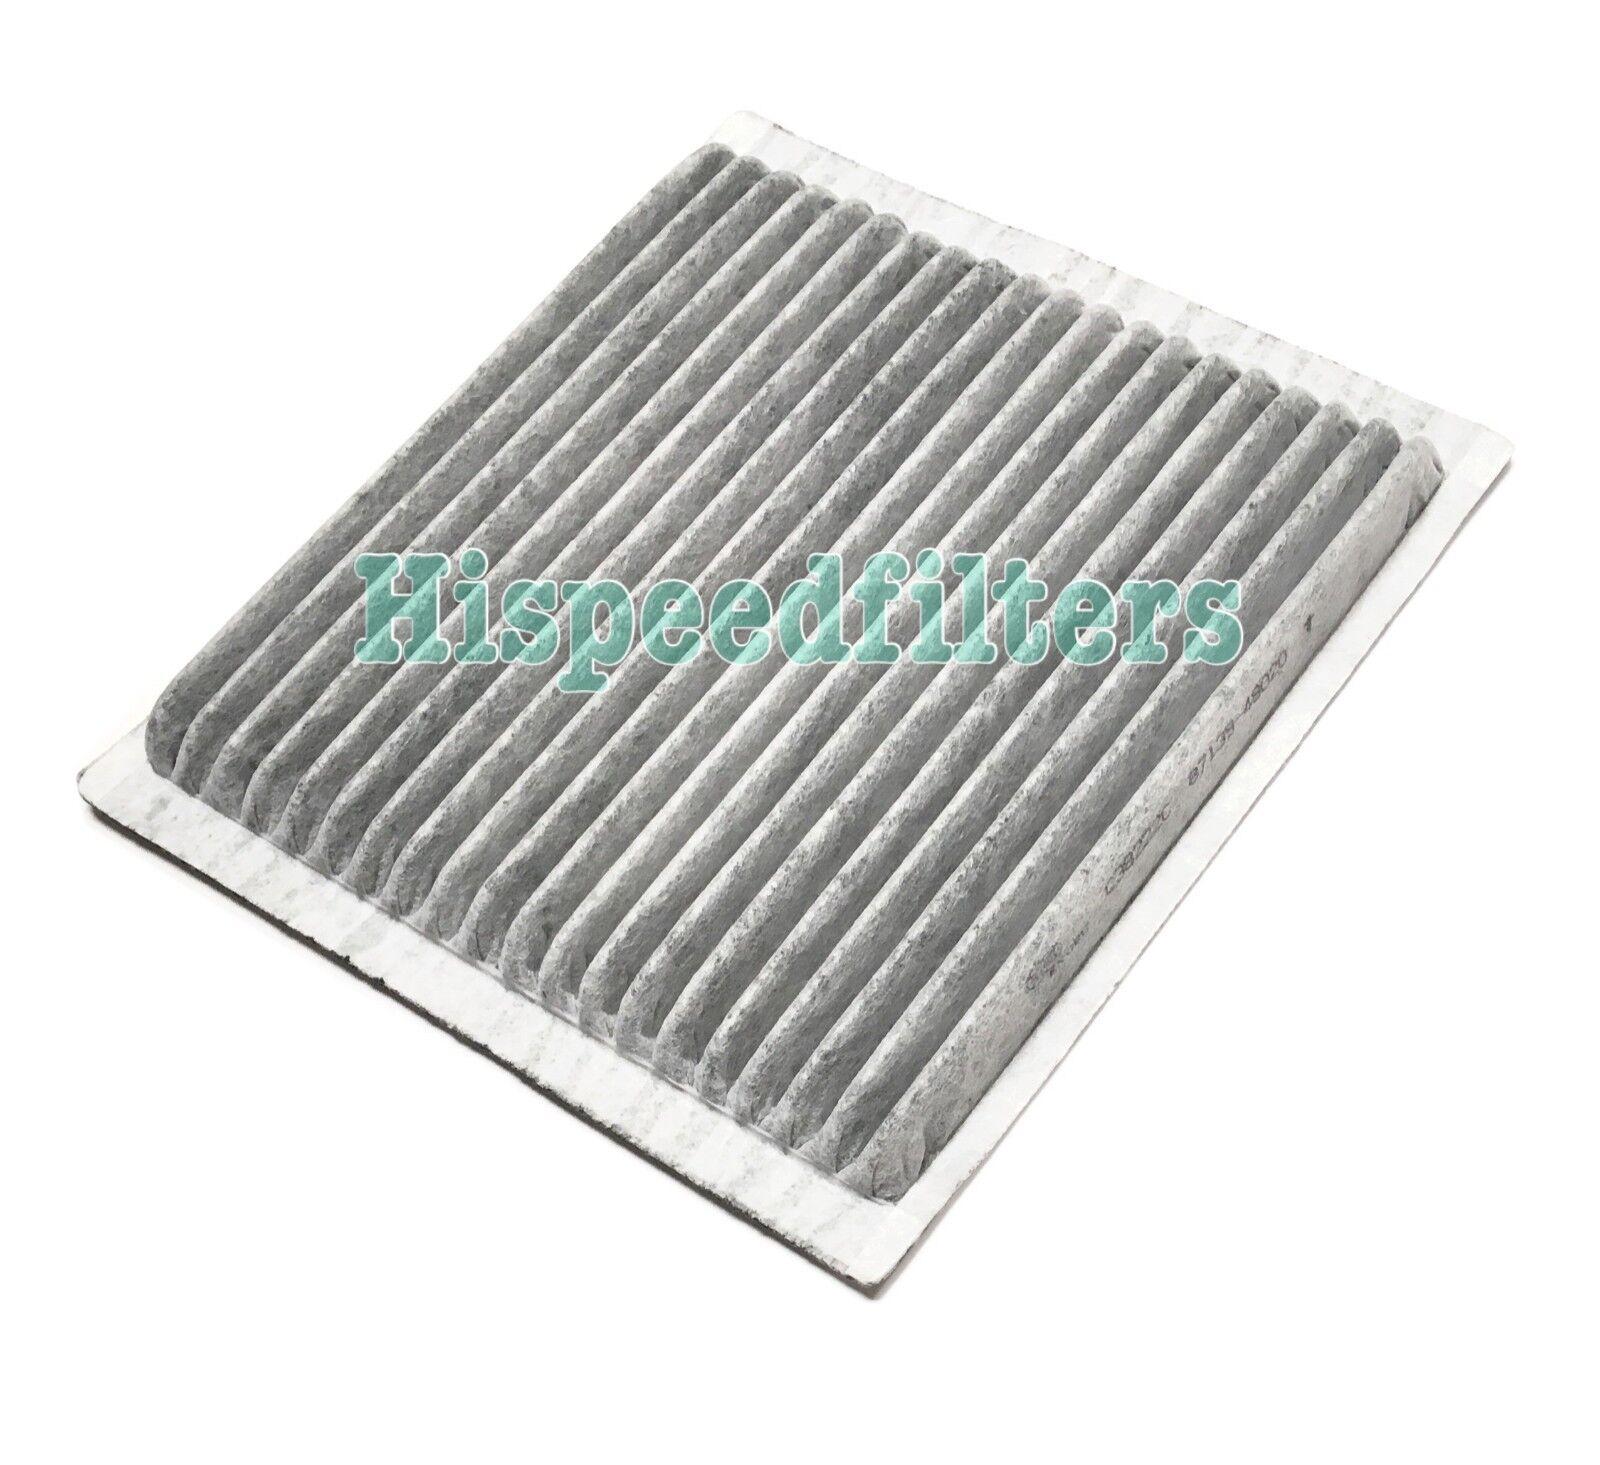 CARBONIZED CABIN AIR FILTER For Highlander 01-07 Lexus IS300 GS300 GS400 RX300